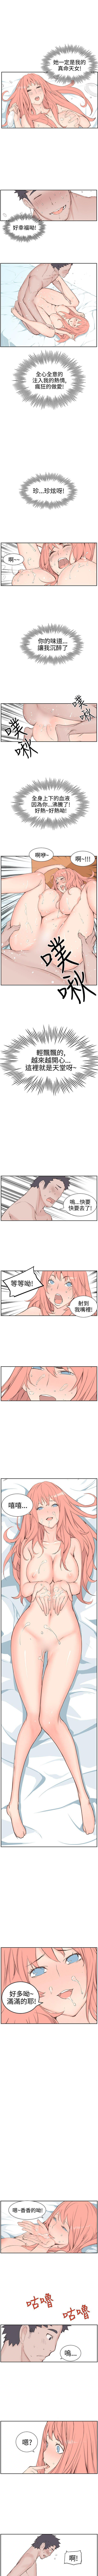 Perverted LOVE不動產 1-11 Tit - Page 12